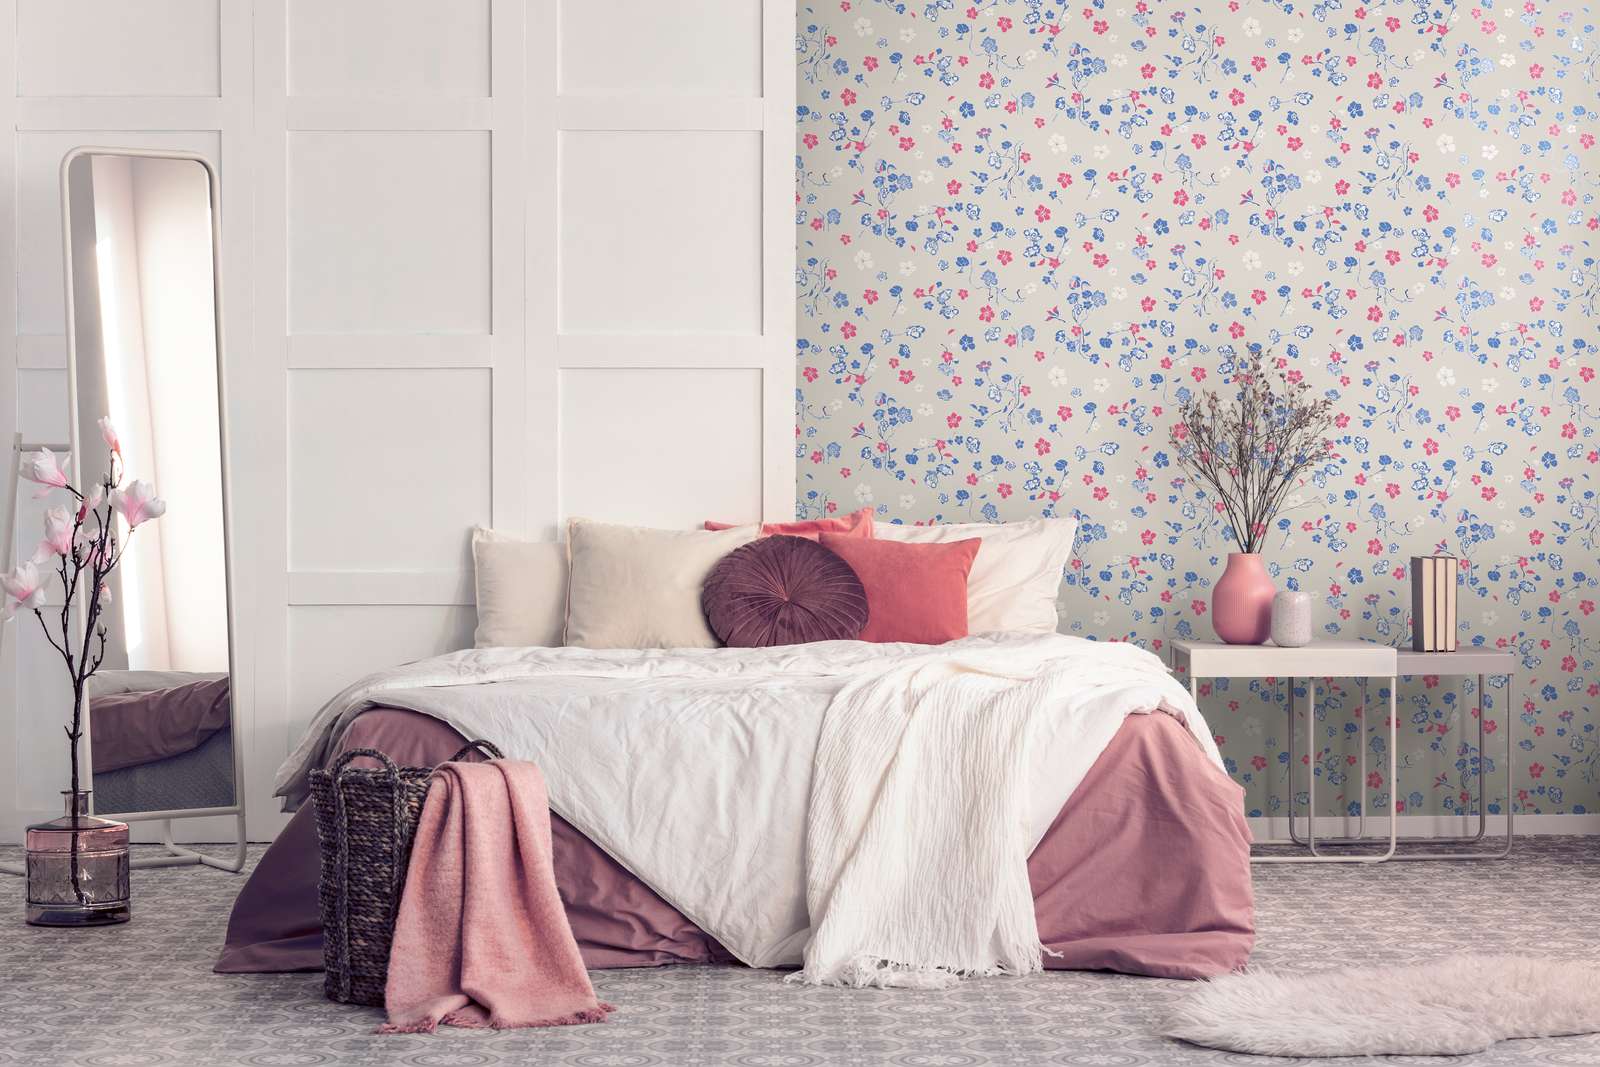             Non-woven wallpaper with playful floral pattern - light grey, blue, pink
        